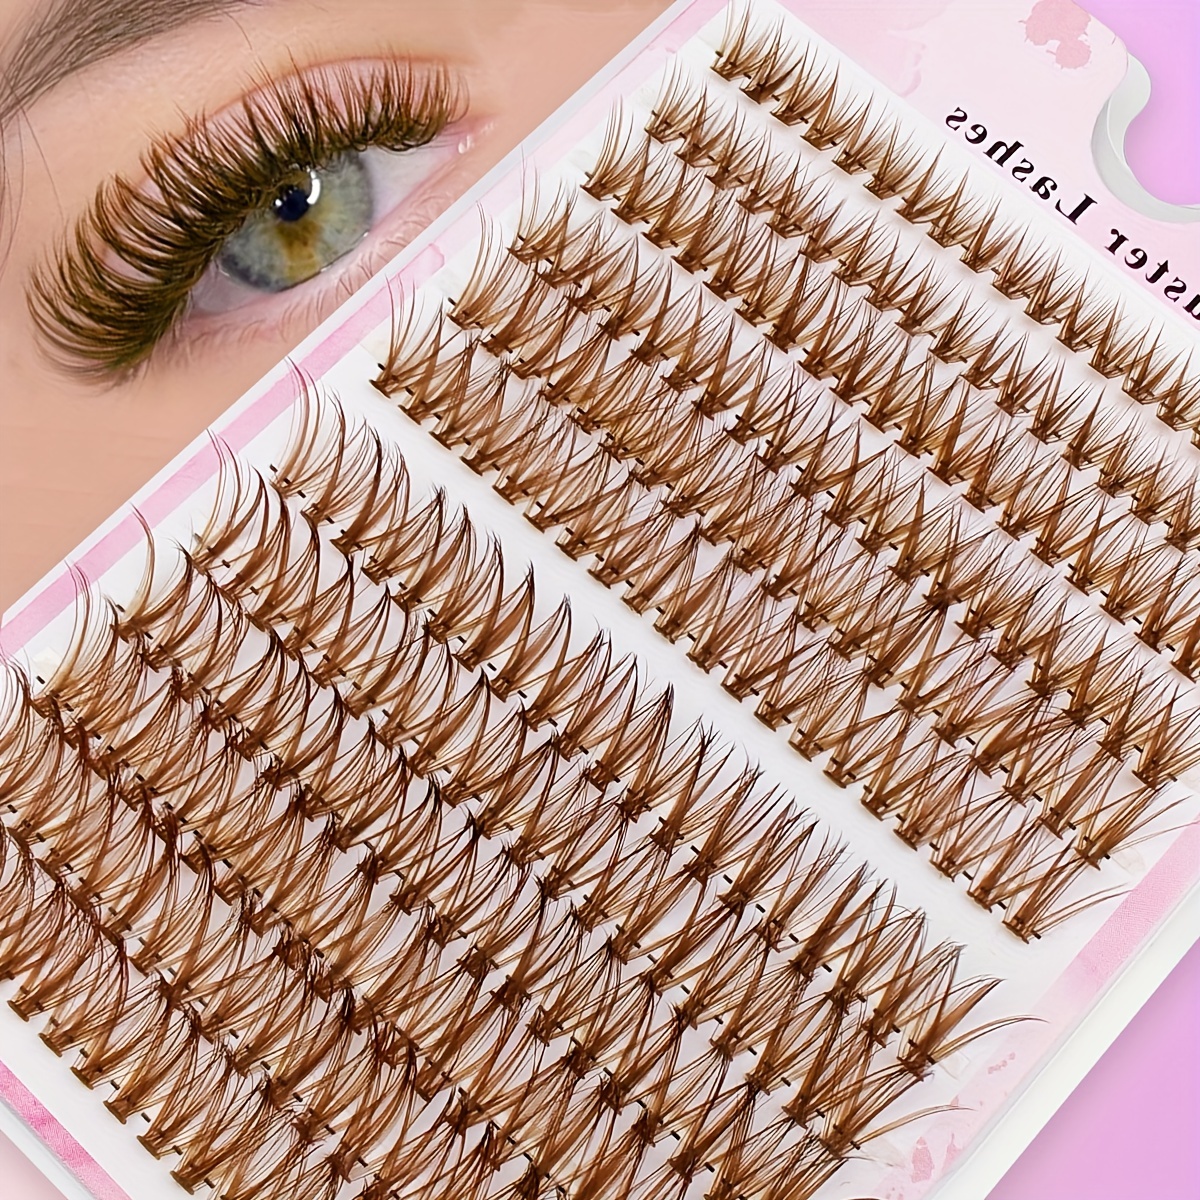 

240-piece Brown Lash Clusters - Diy Eyelash Extensions, Wispy & Soft, Natural Look, C-, 8-16mm Mix For Thick, Cat Eye Effect